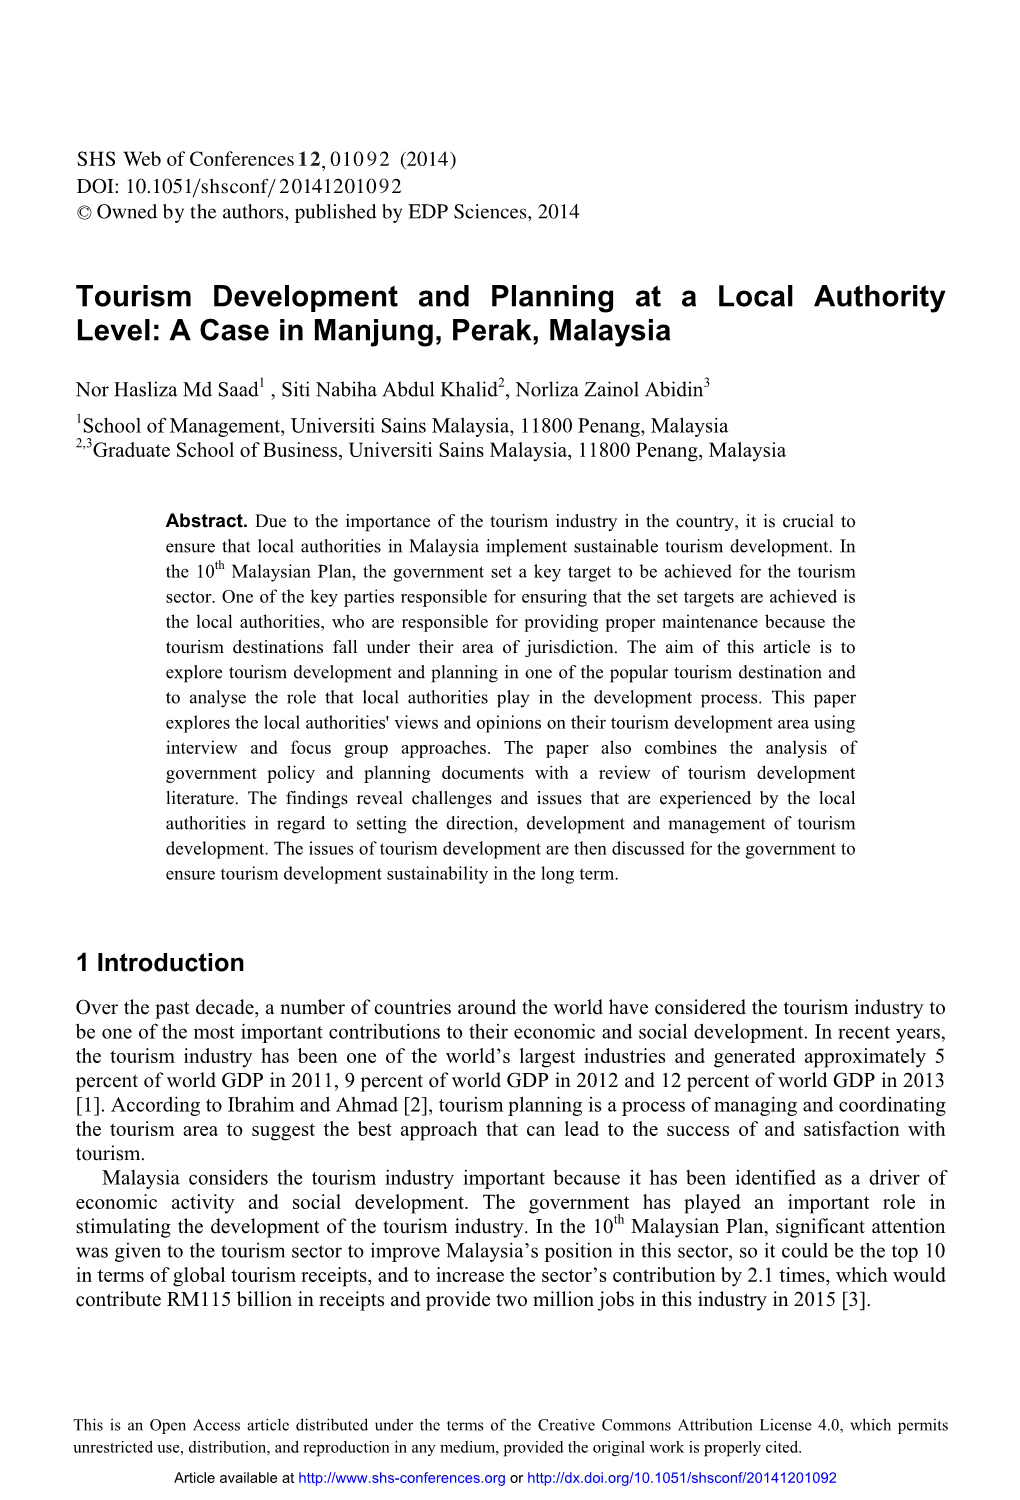 Tourism Development and Planning at a Local Authority Level: a Case in Manjung, Perak, Malaysia